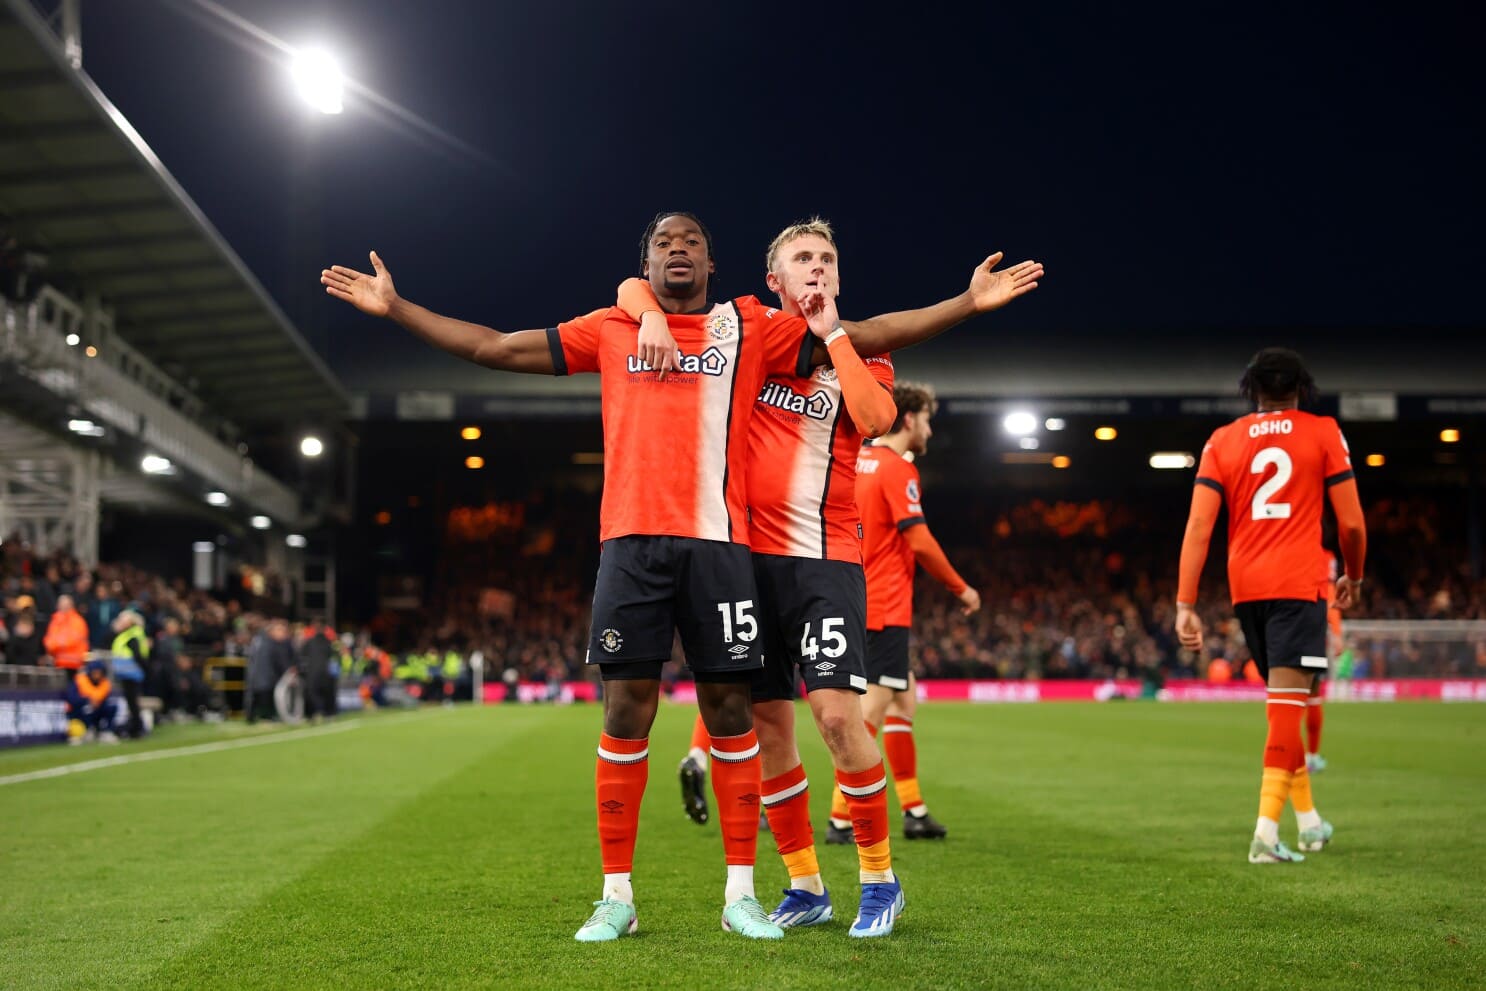 Crystal Palace vs Luton Town: prediction for the Premier League Week 28